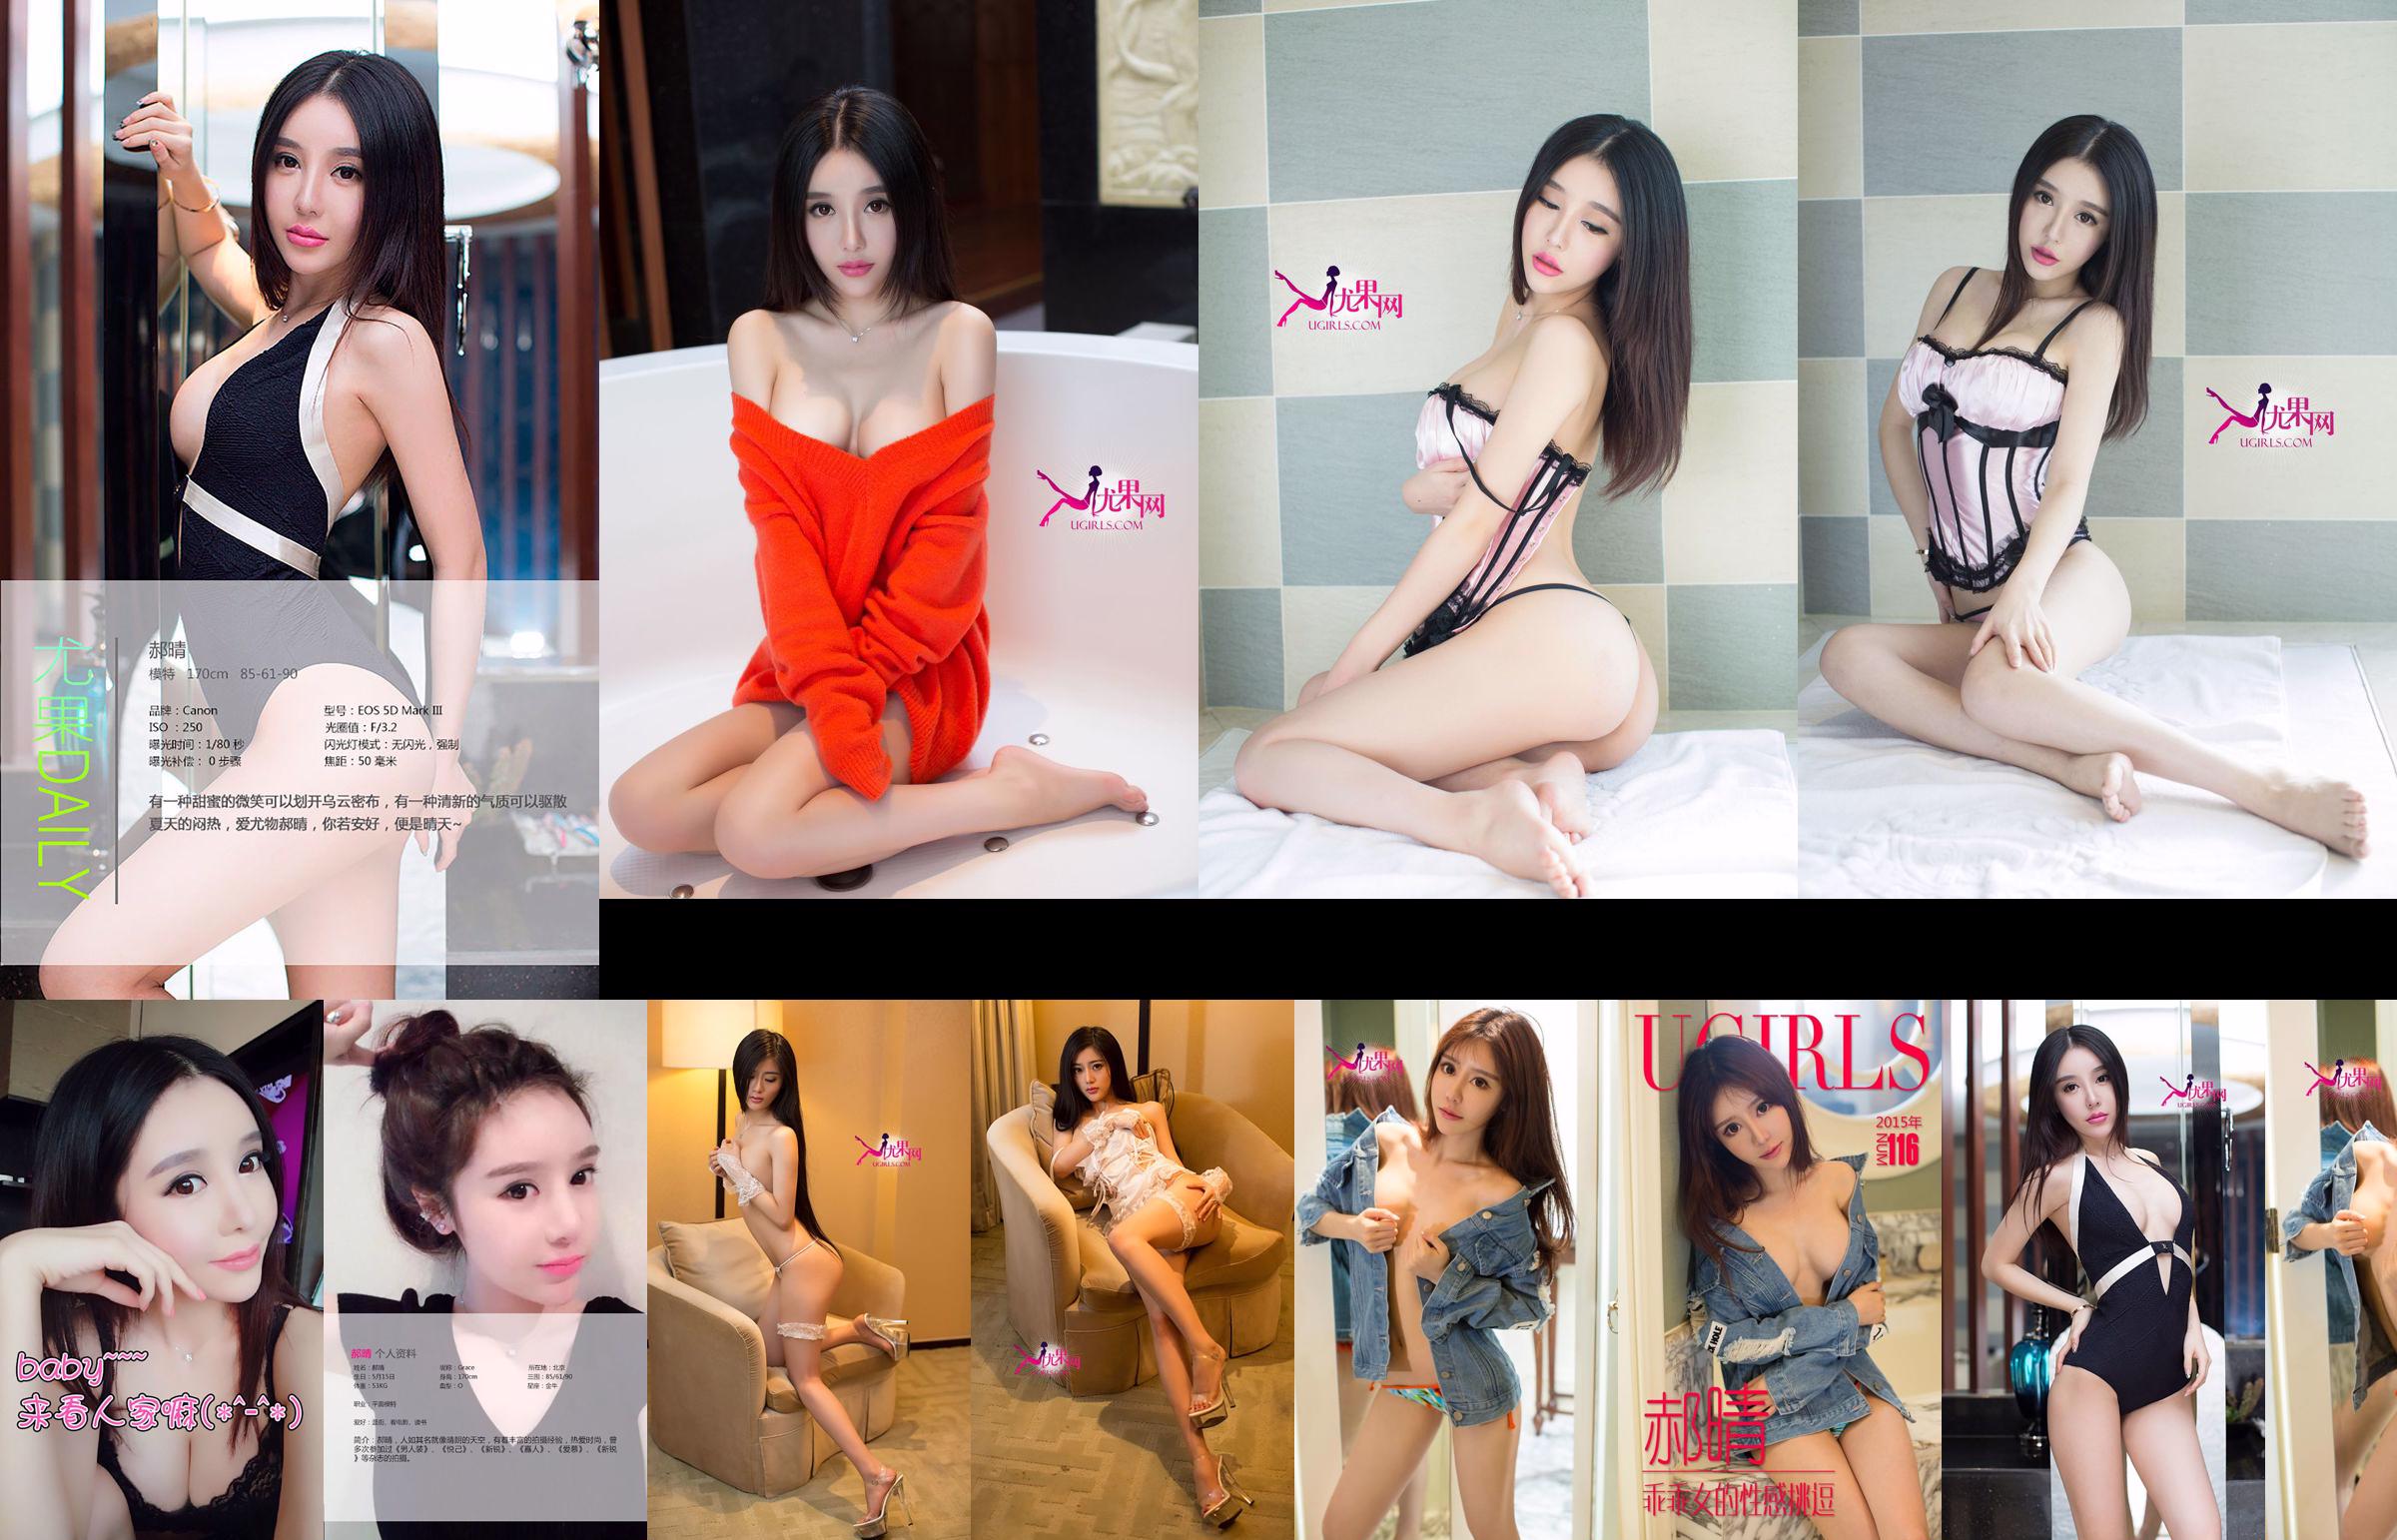 Hao Qing "The Sexy Provocation of a Good Girl" [Ugirls] No.116 No.164668 Page 1